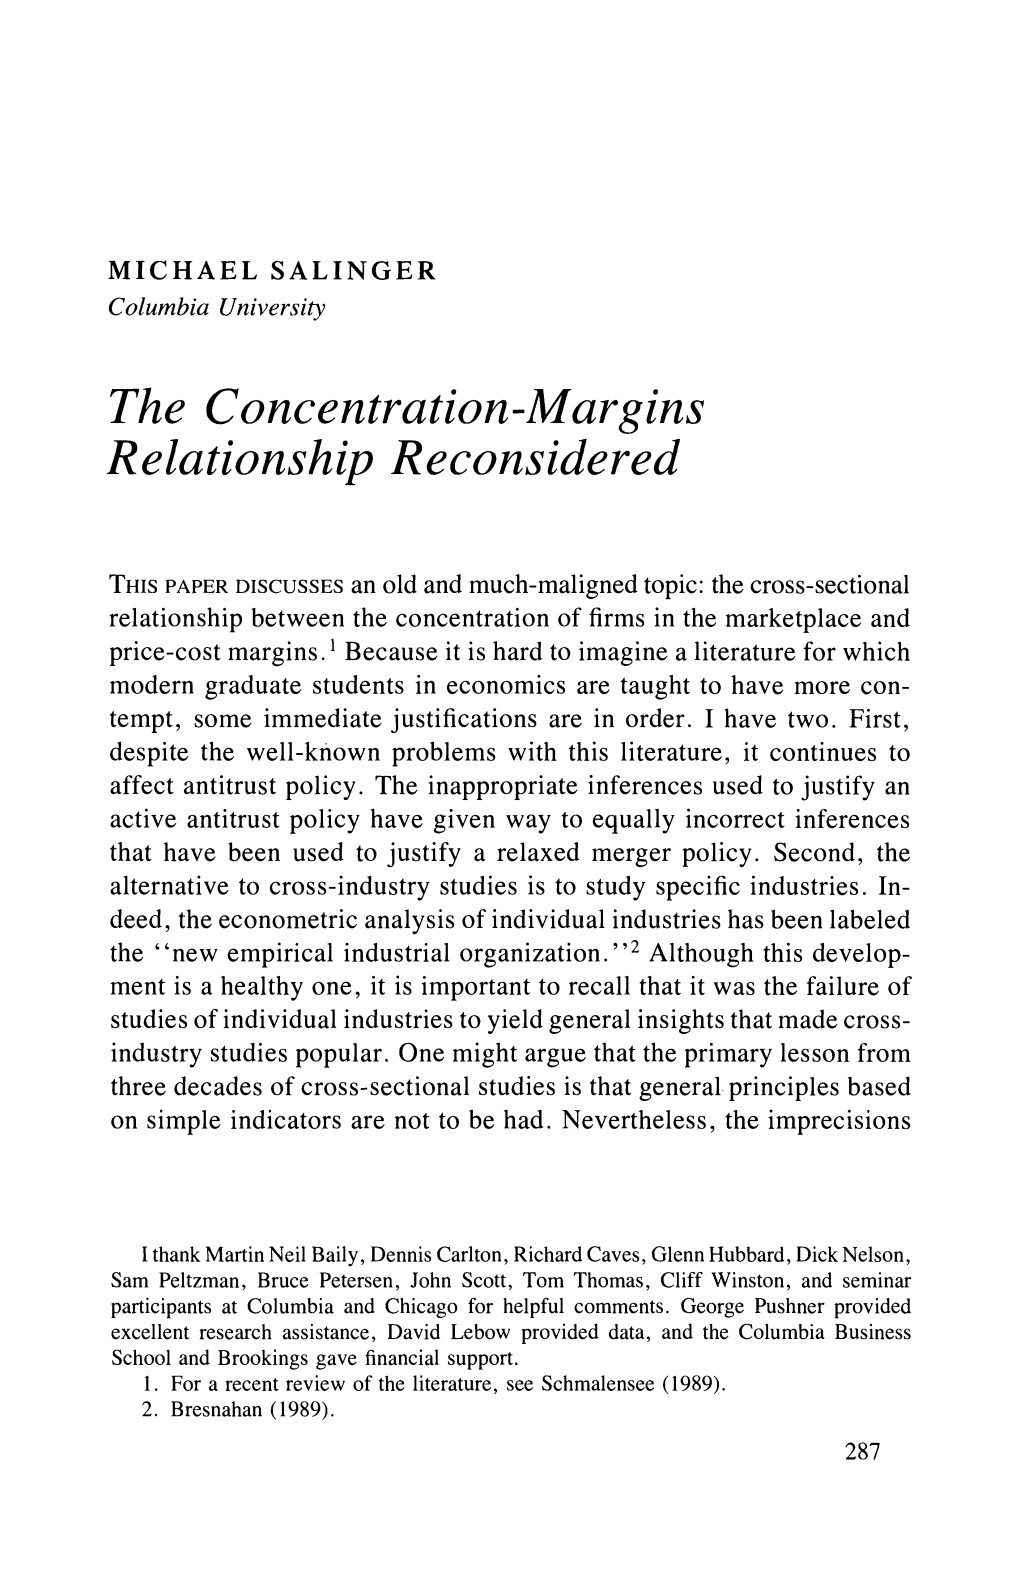 The Concentration-Margins Relationship Reconsidered